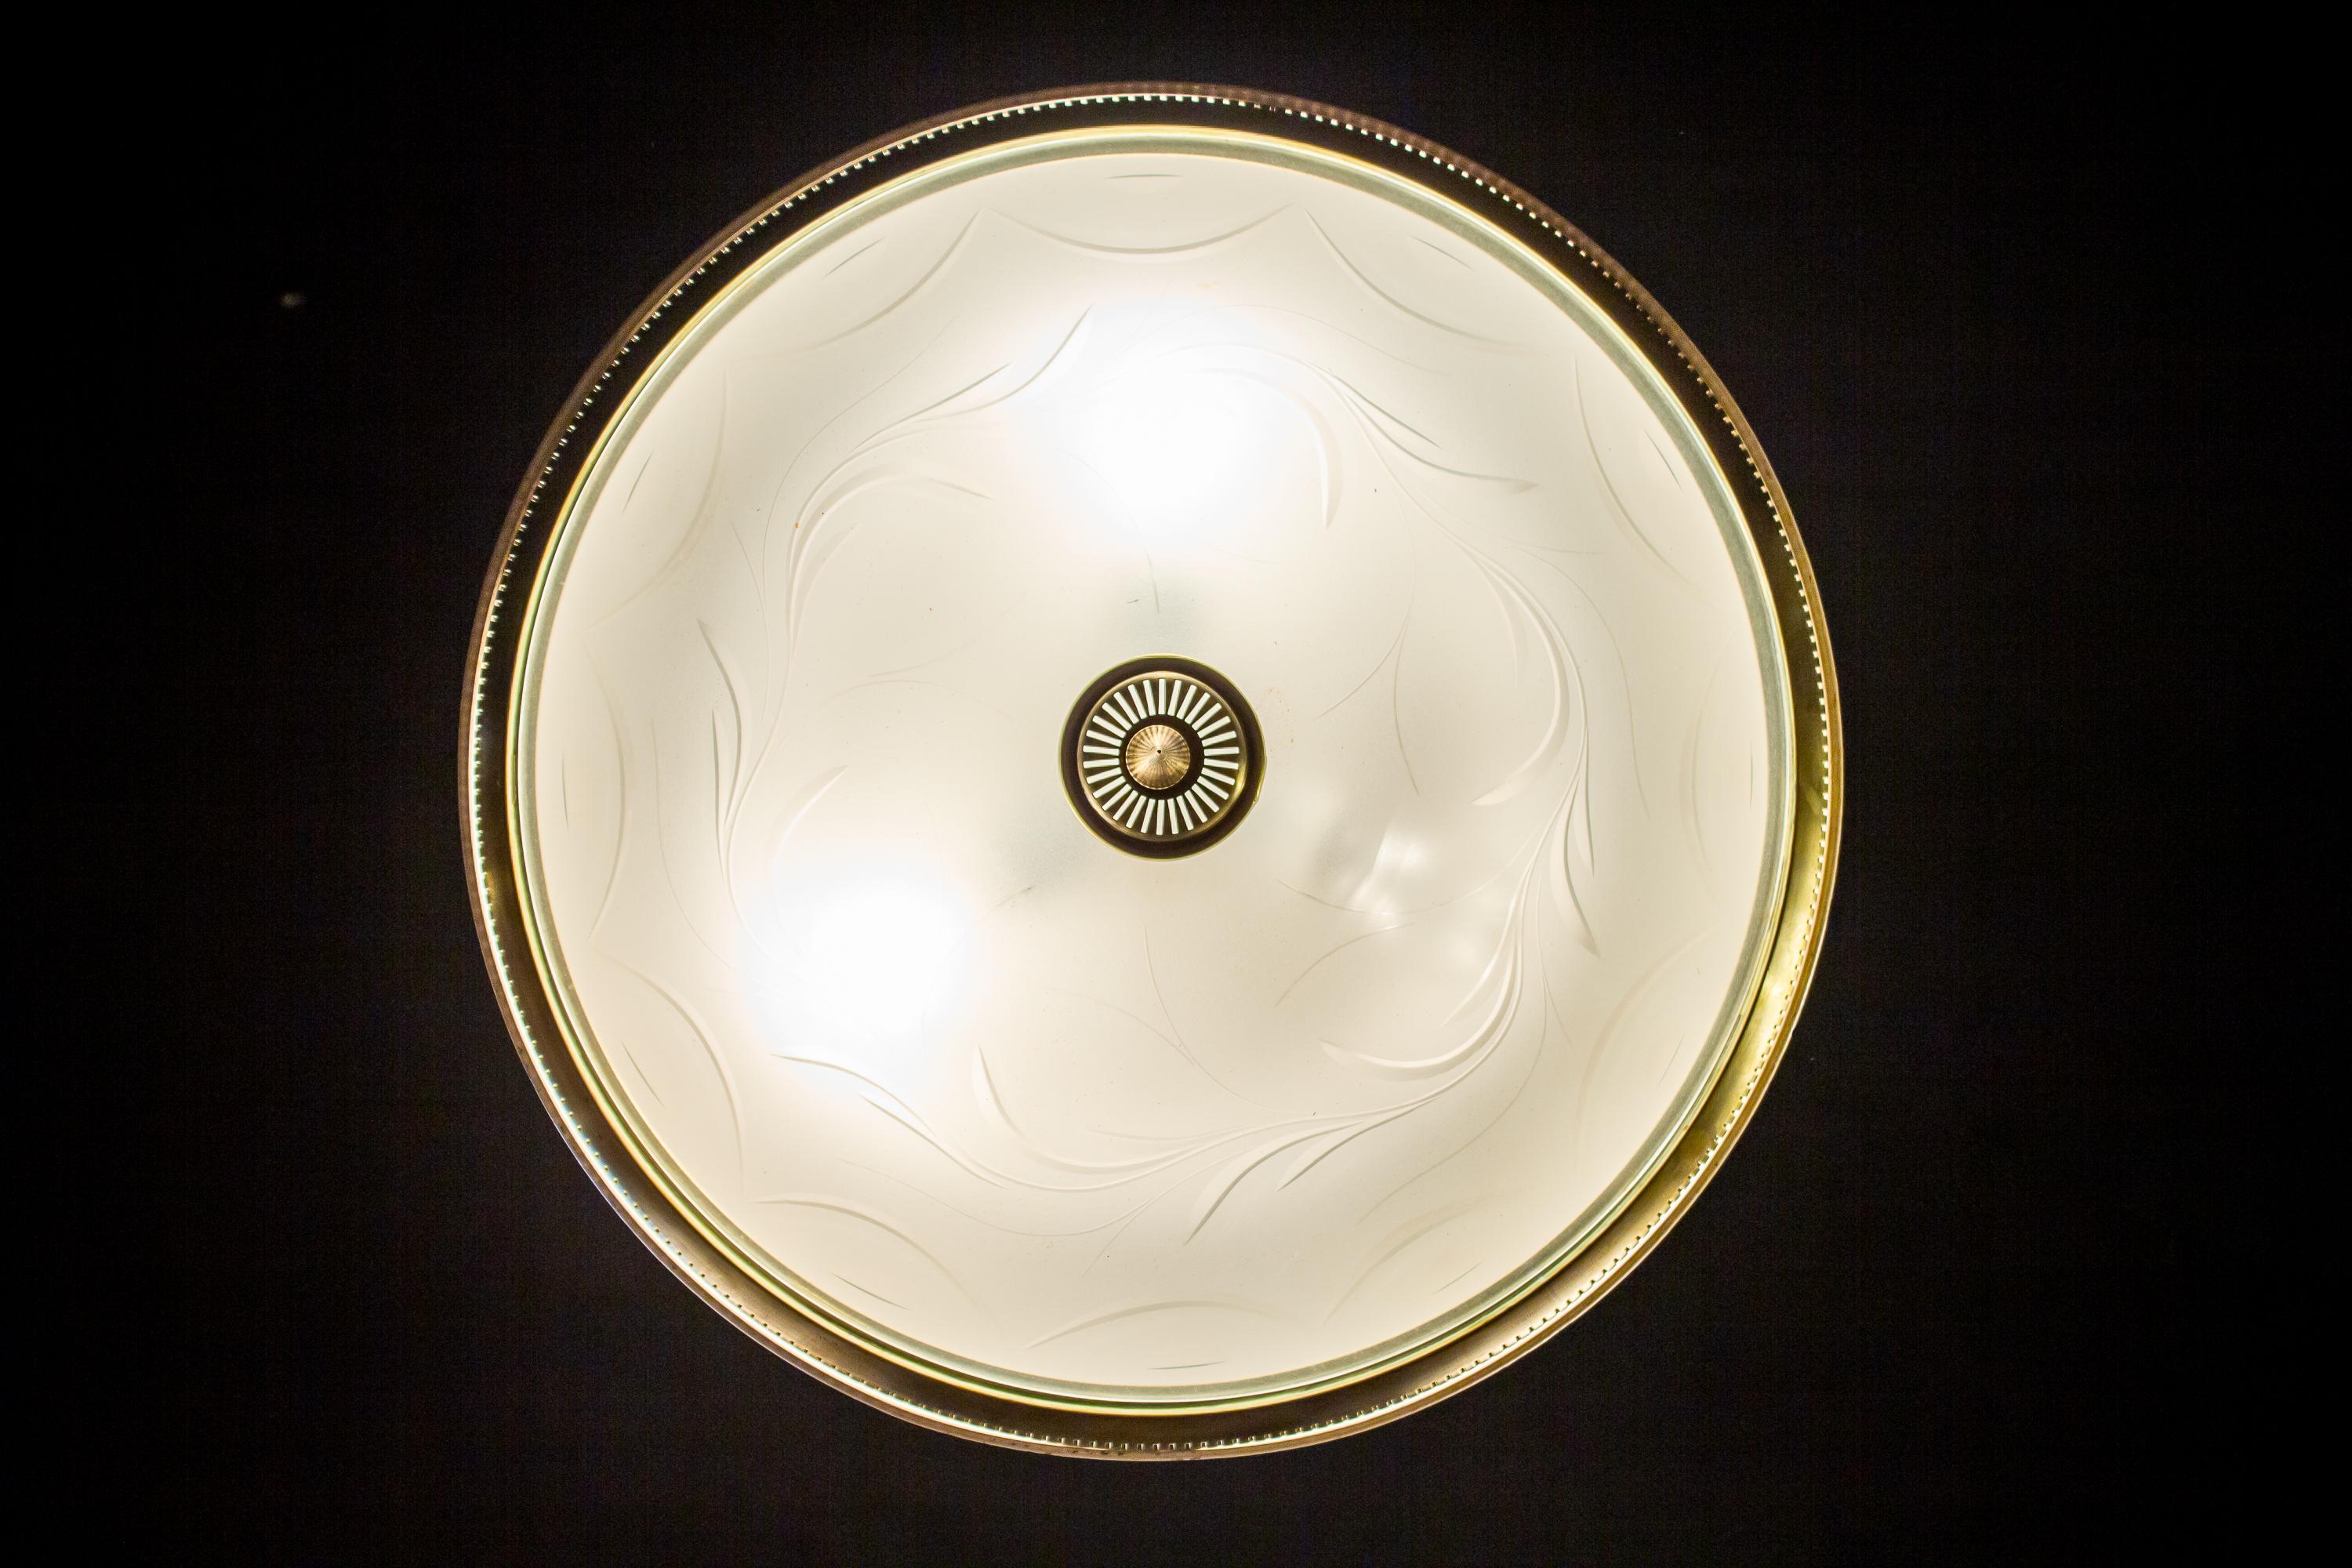 Midcentury Ceiling Fixture or Pendant by Luigi Brusotti, Italy, 1940 For Sale 6